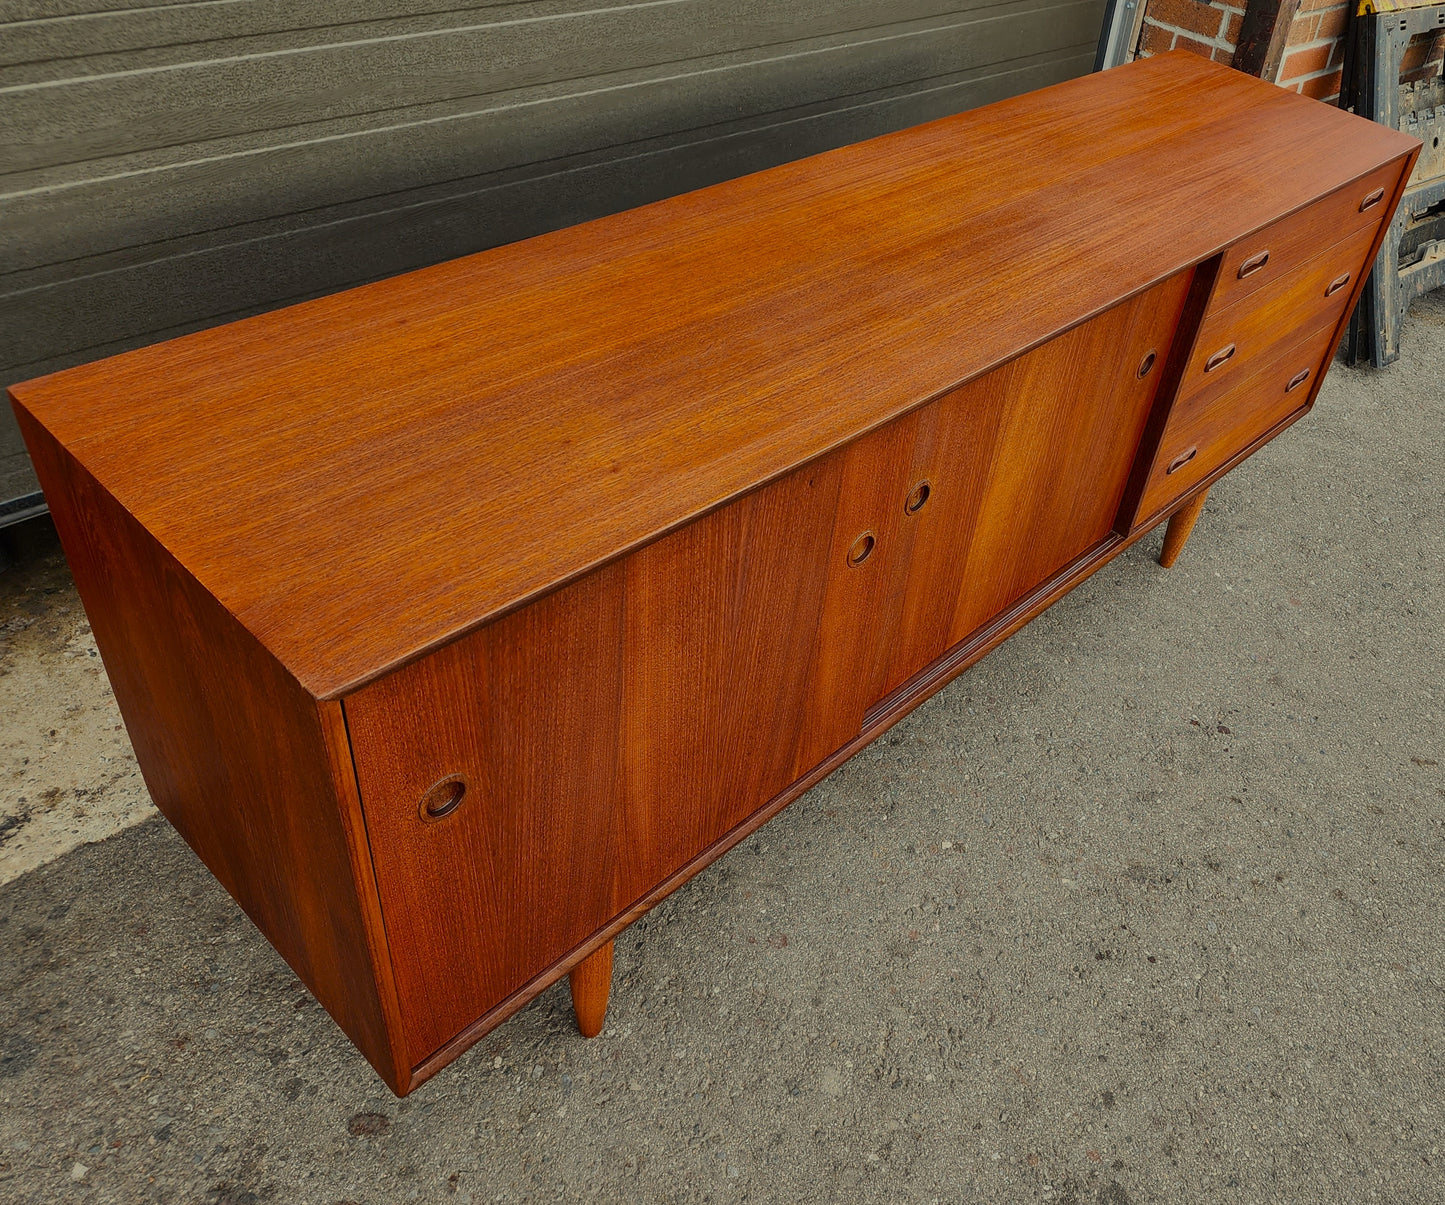 REFINISHED Mid Century Modern Teak Sideboard by Punch Designs 6 ft